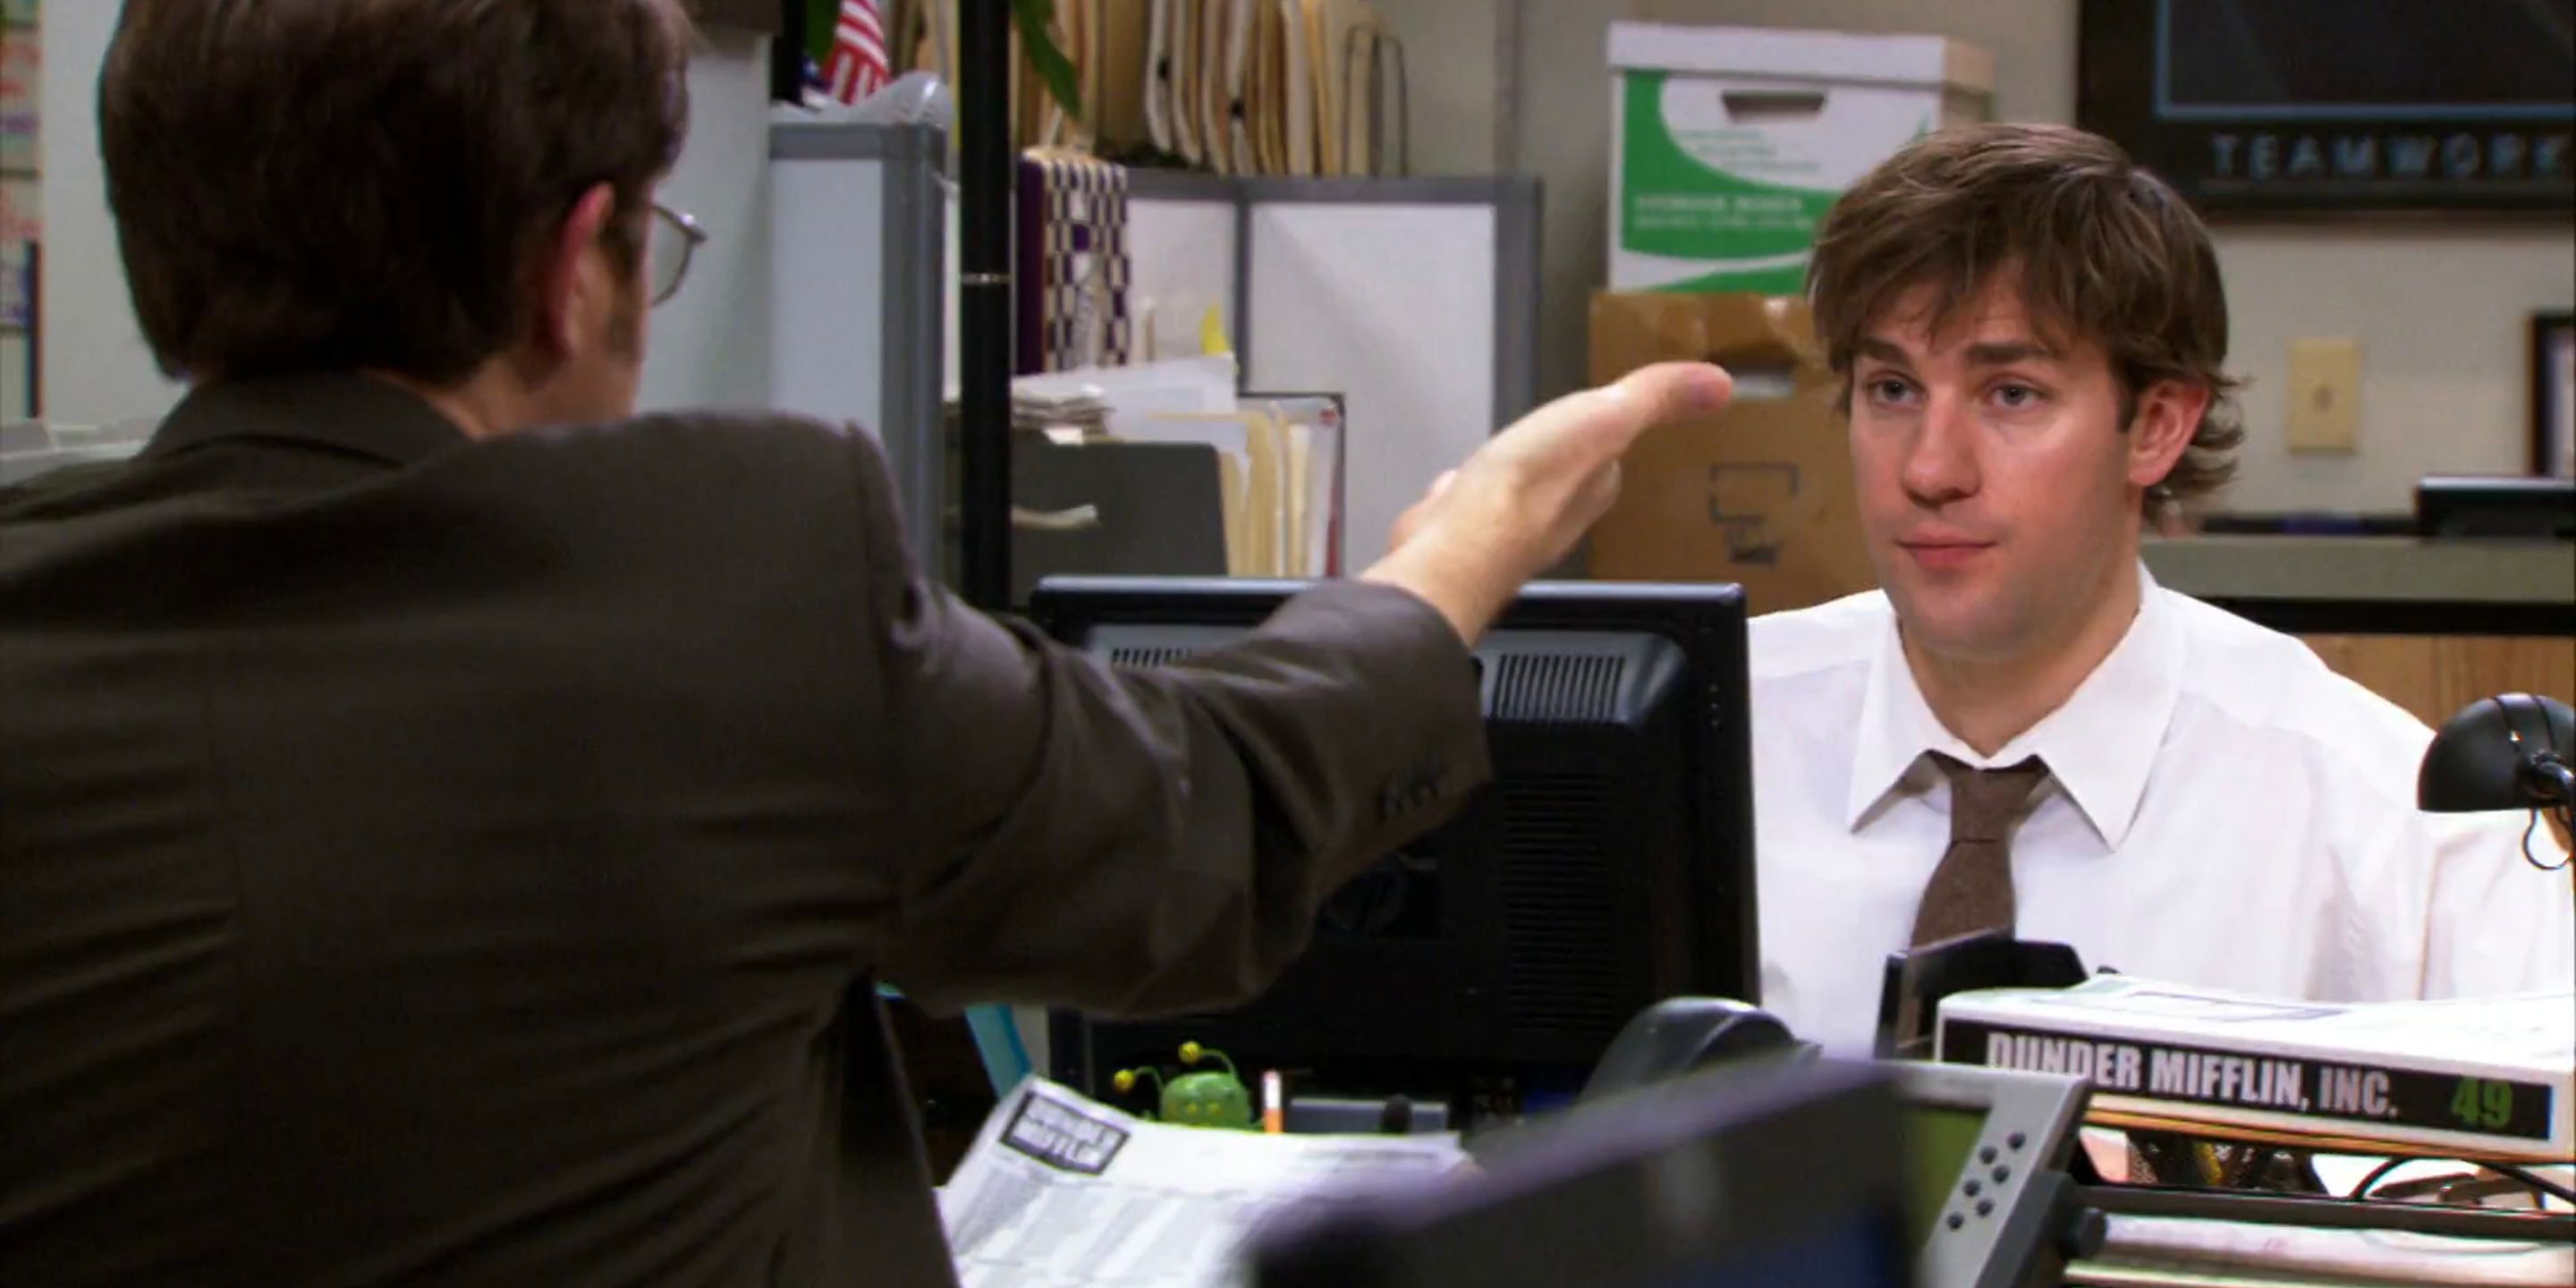 Jim tests Pavlov's Theory on Dwight in The Office.